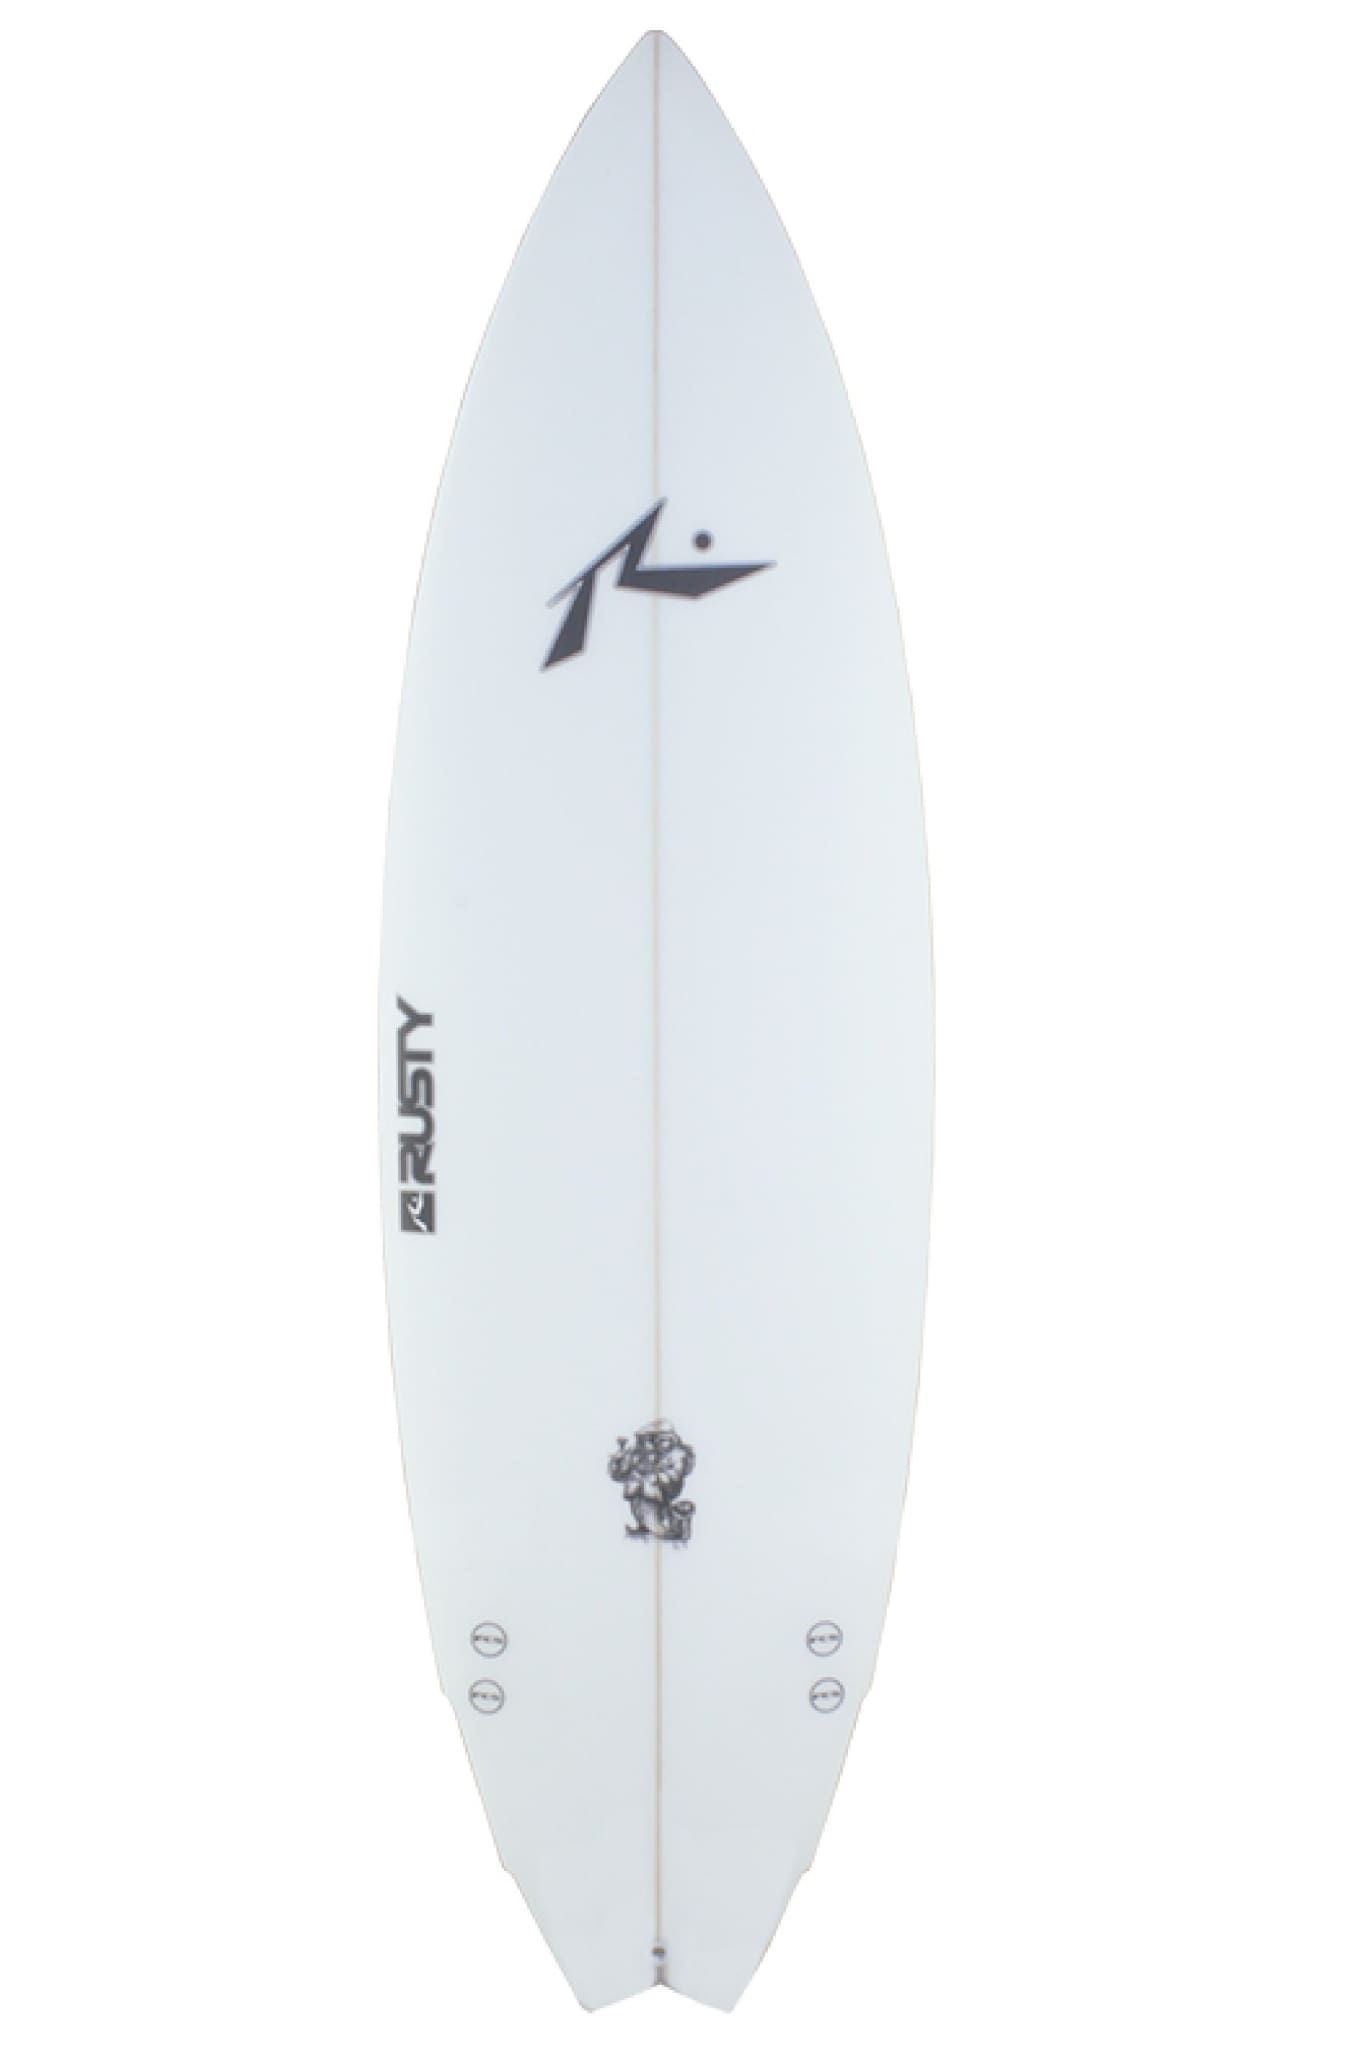 Catfish | Surfboards-Rusty Surfboards South Africa